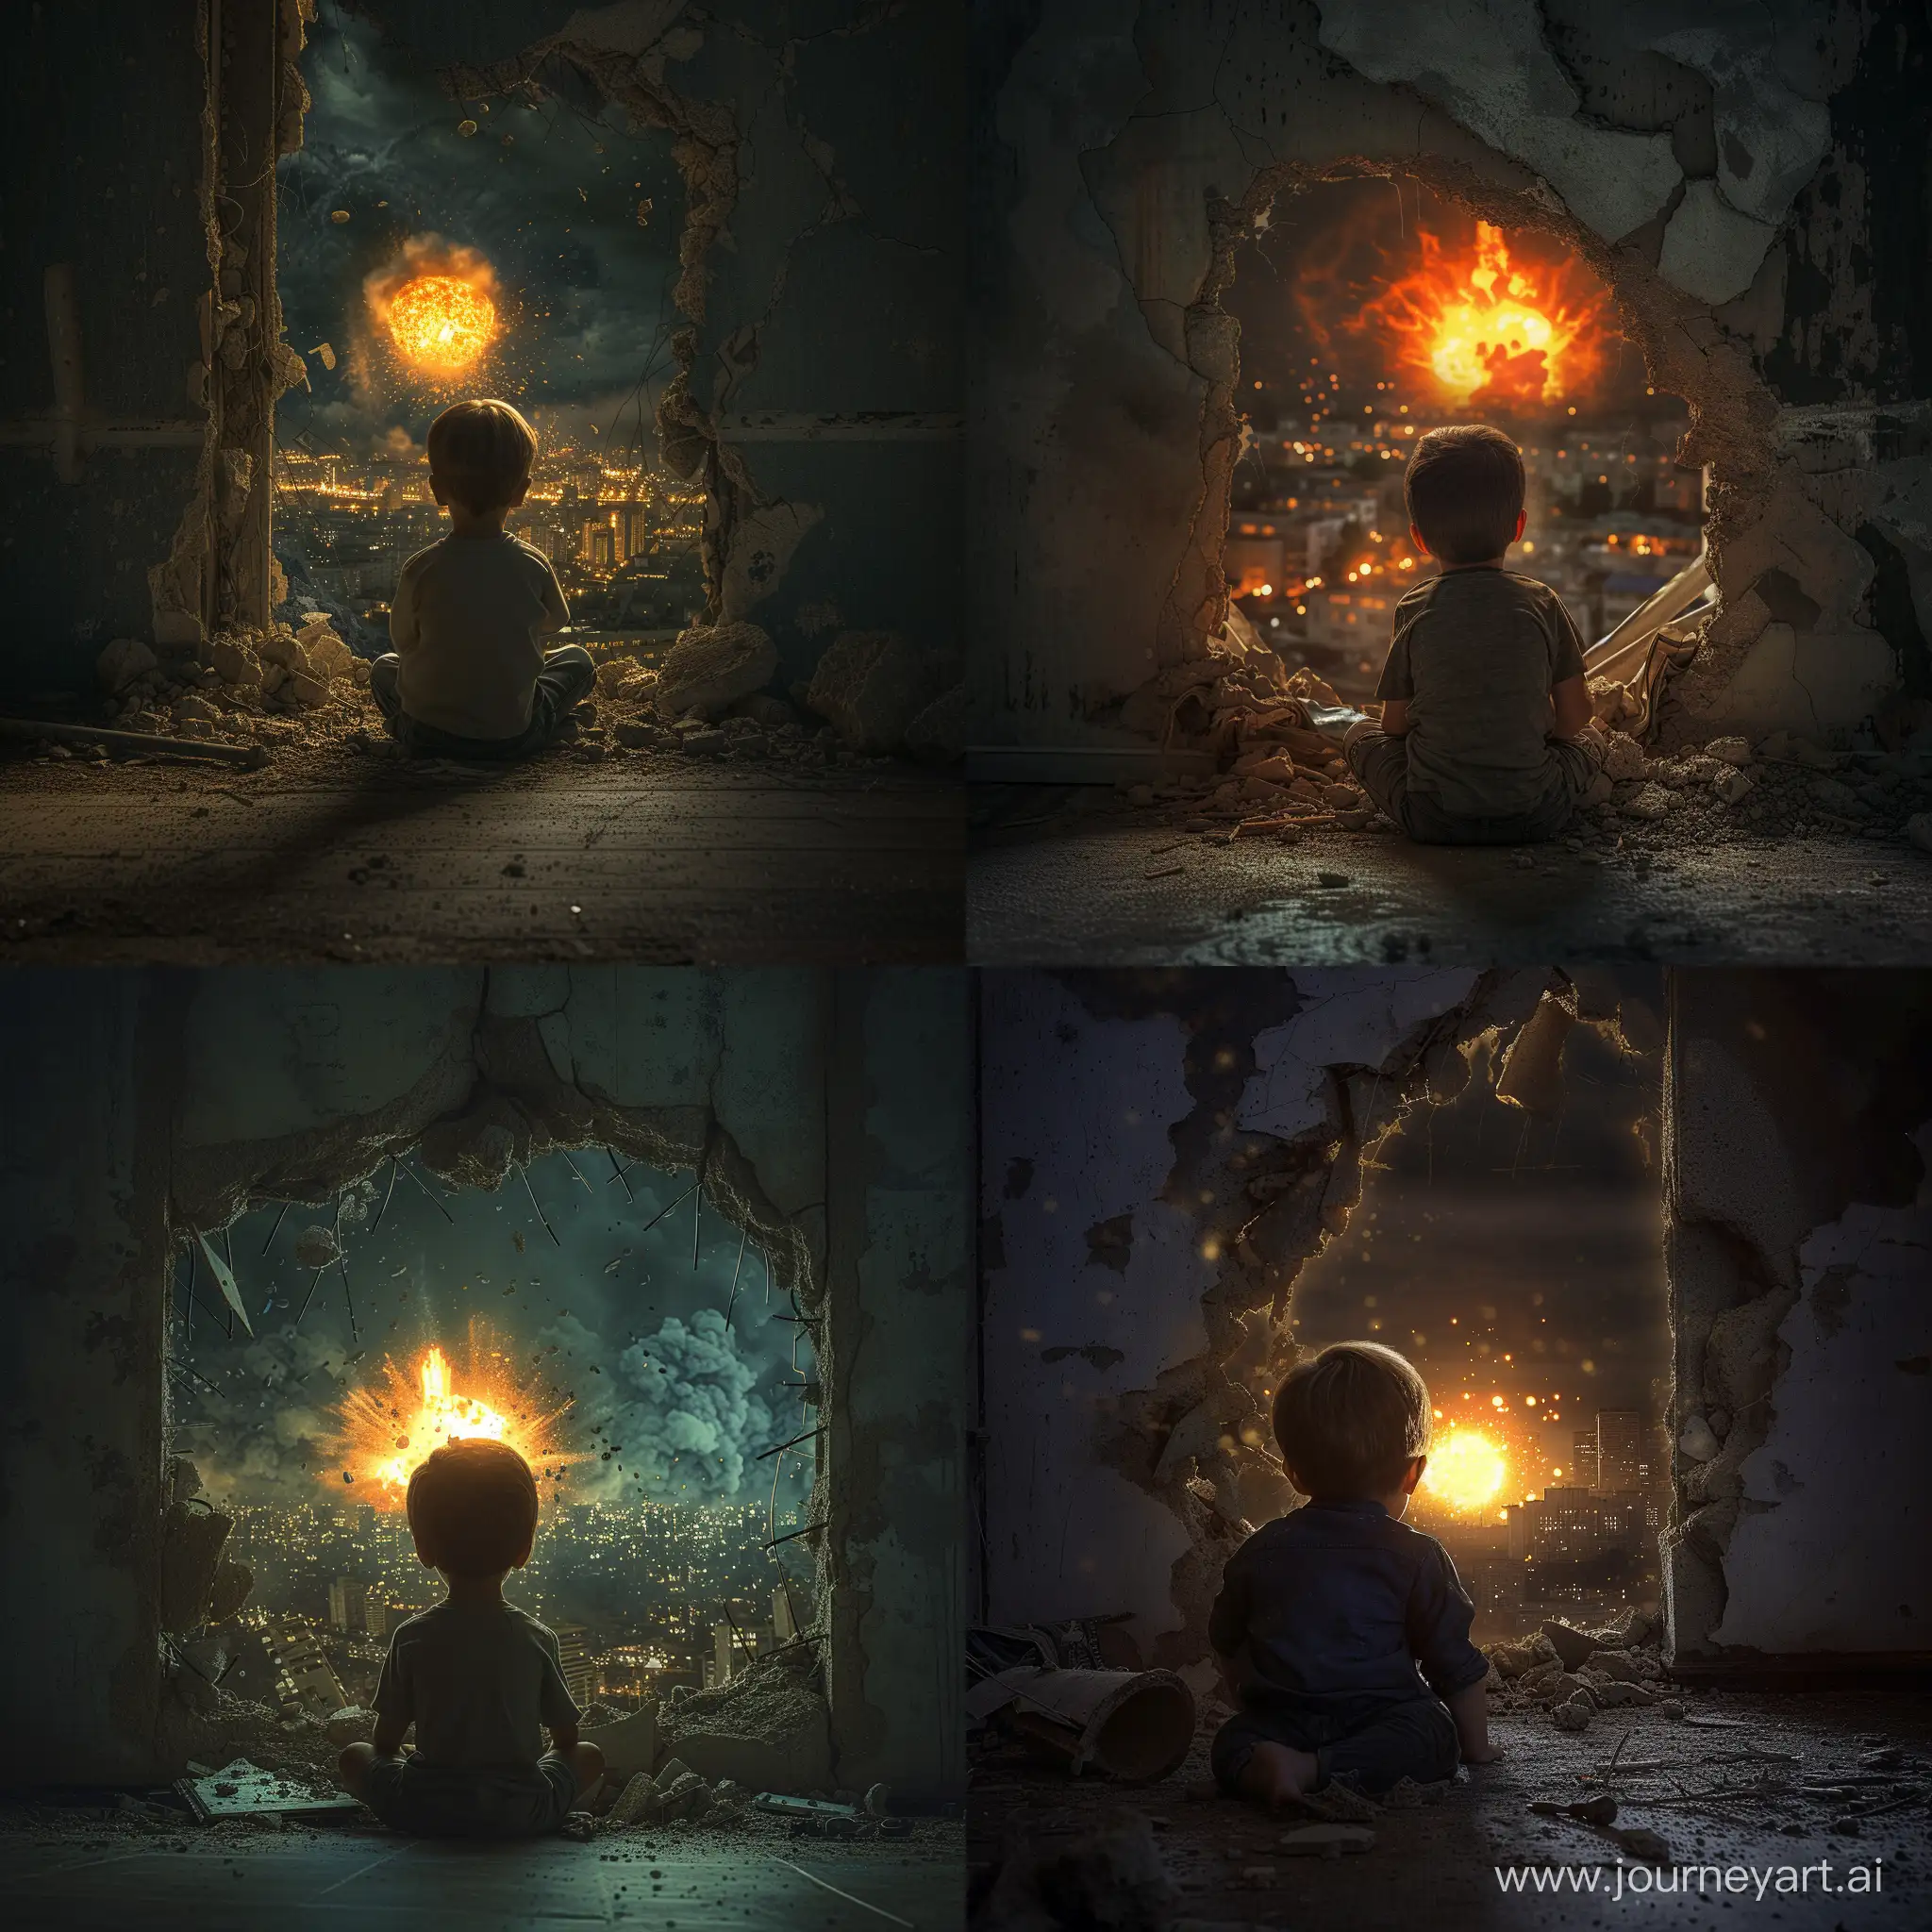 Adorable-10YearOld-Boy-Contemplates-Nuclear-Apocalypse-in-Abandoned-Room